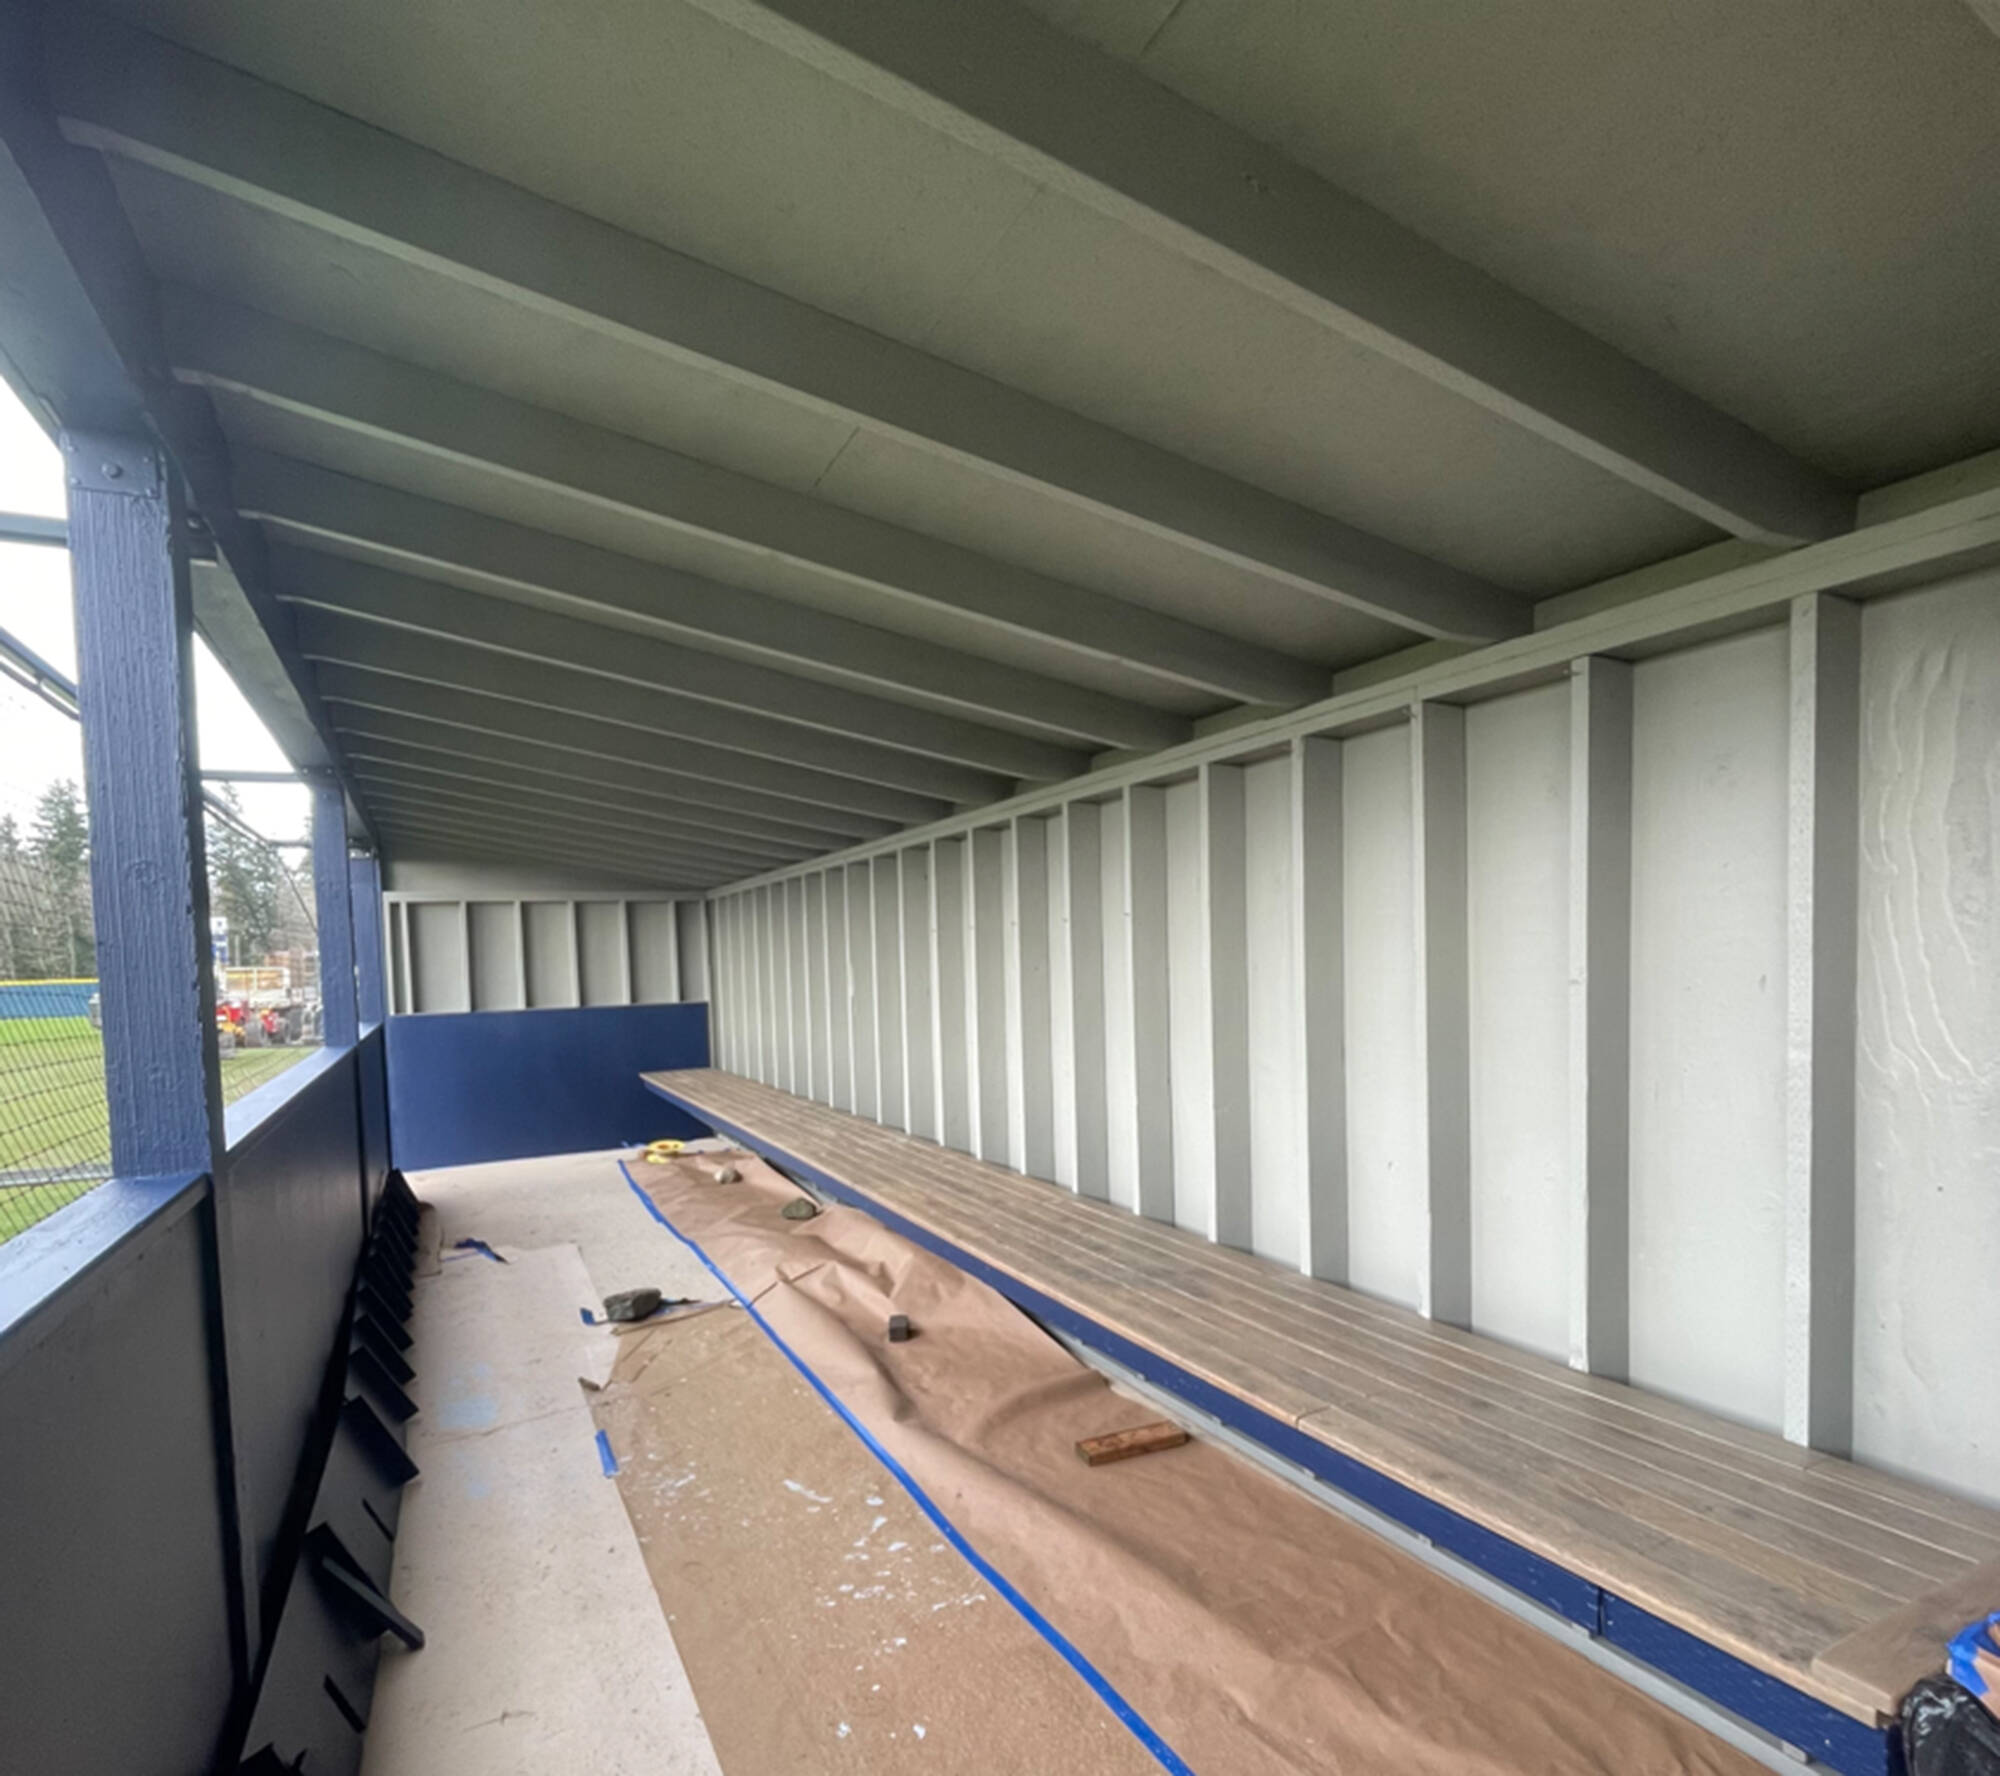 The Bainbridge Spartans are improving their baseball field, including repainting the dugouts. Courtesy Photo